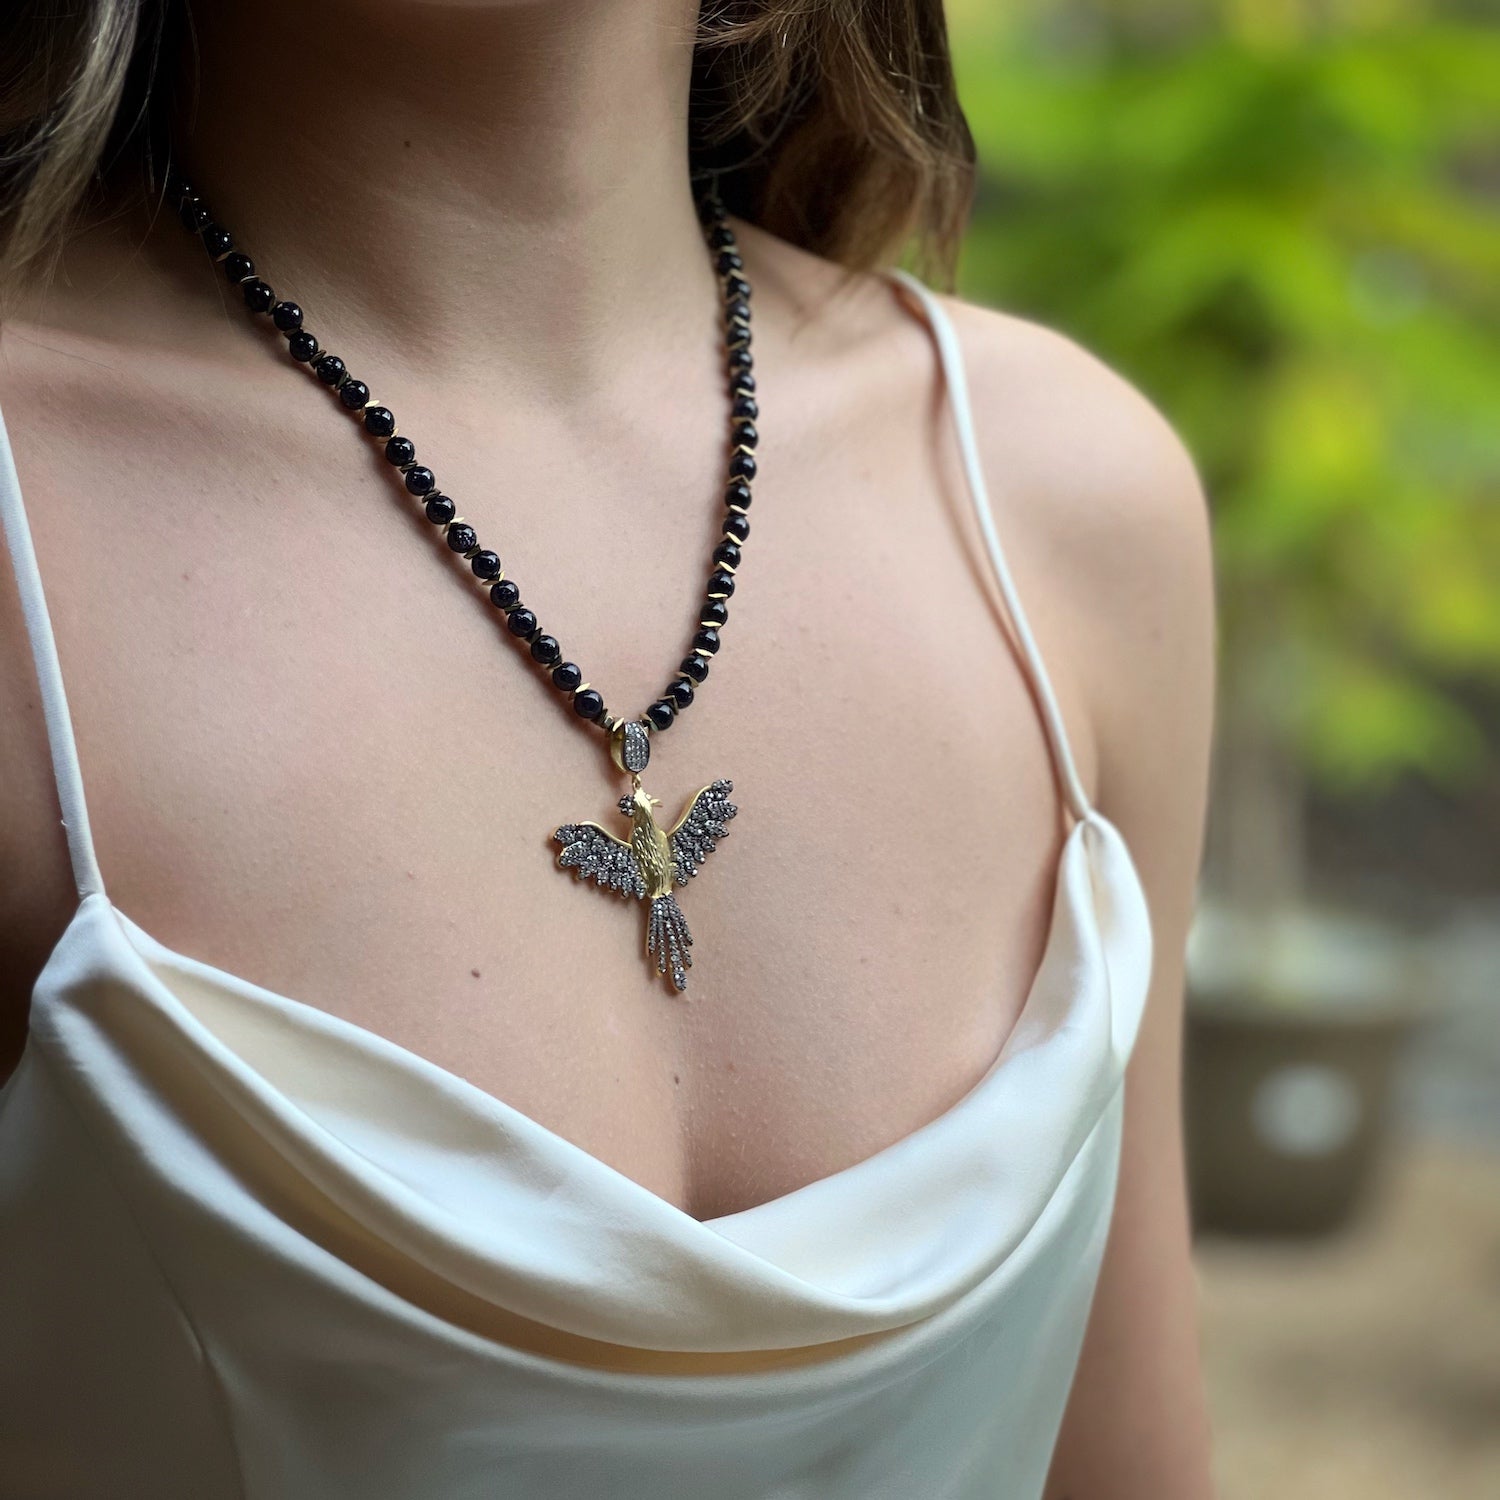 The model showcases the captivating beauty of the Magical Phoenix Bird Necklace, embodying the spirit of rebirth and transformation.